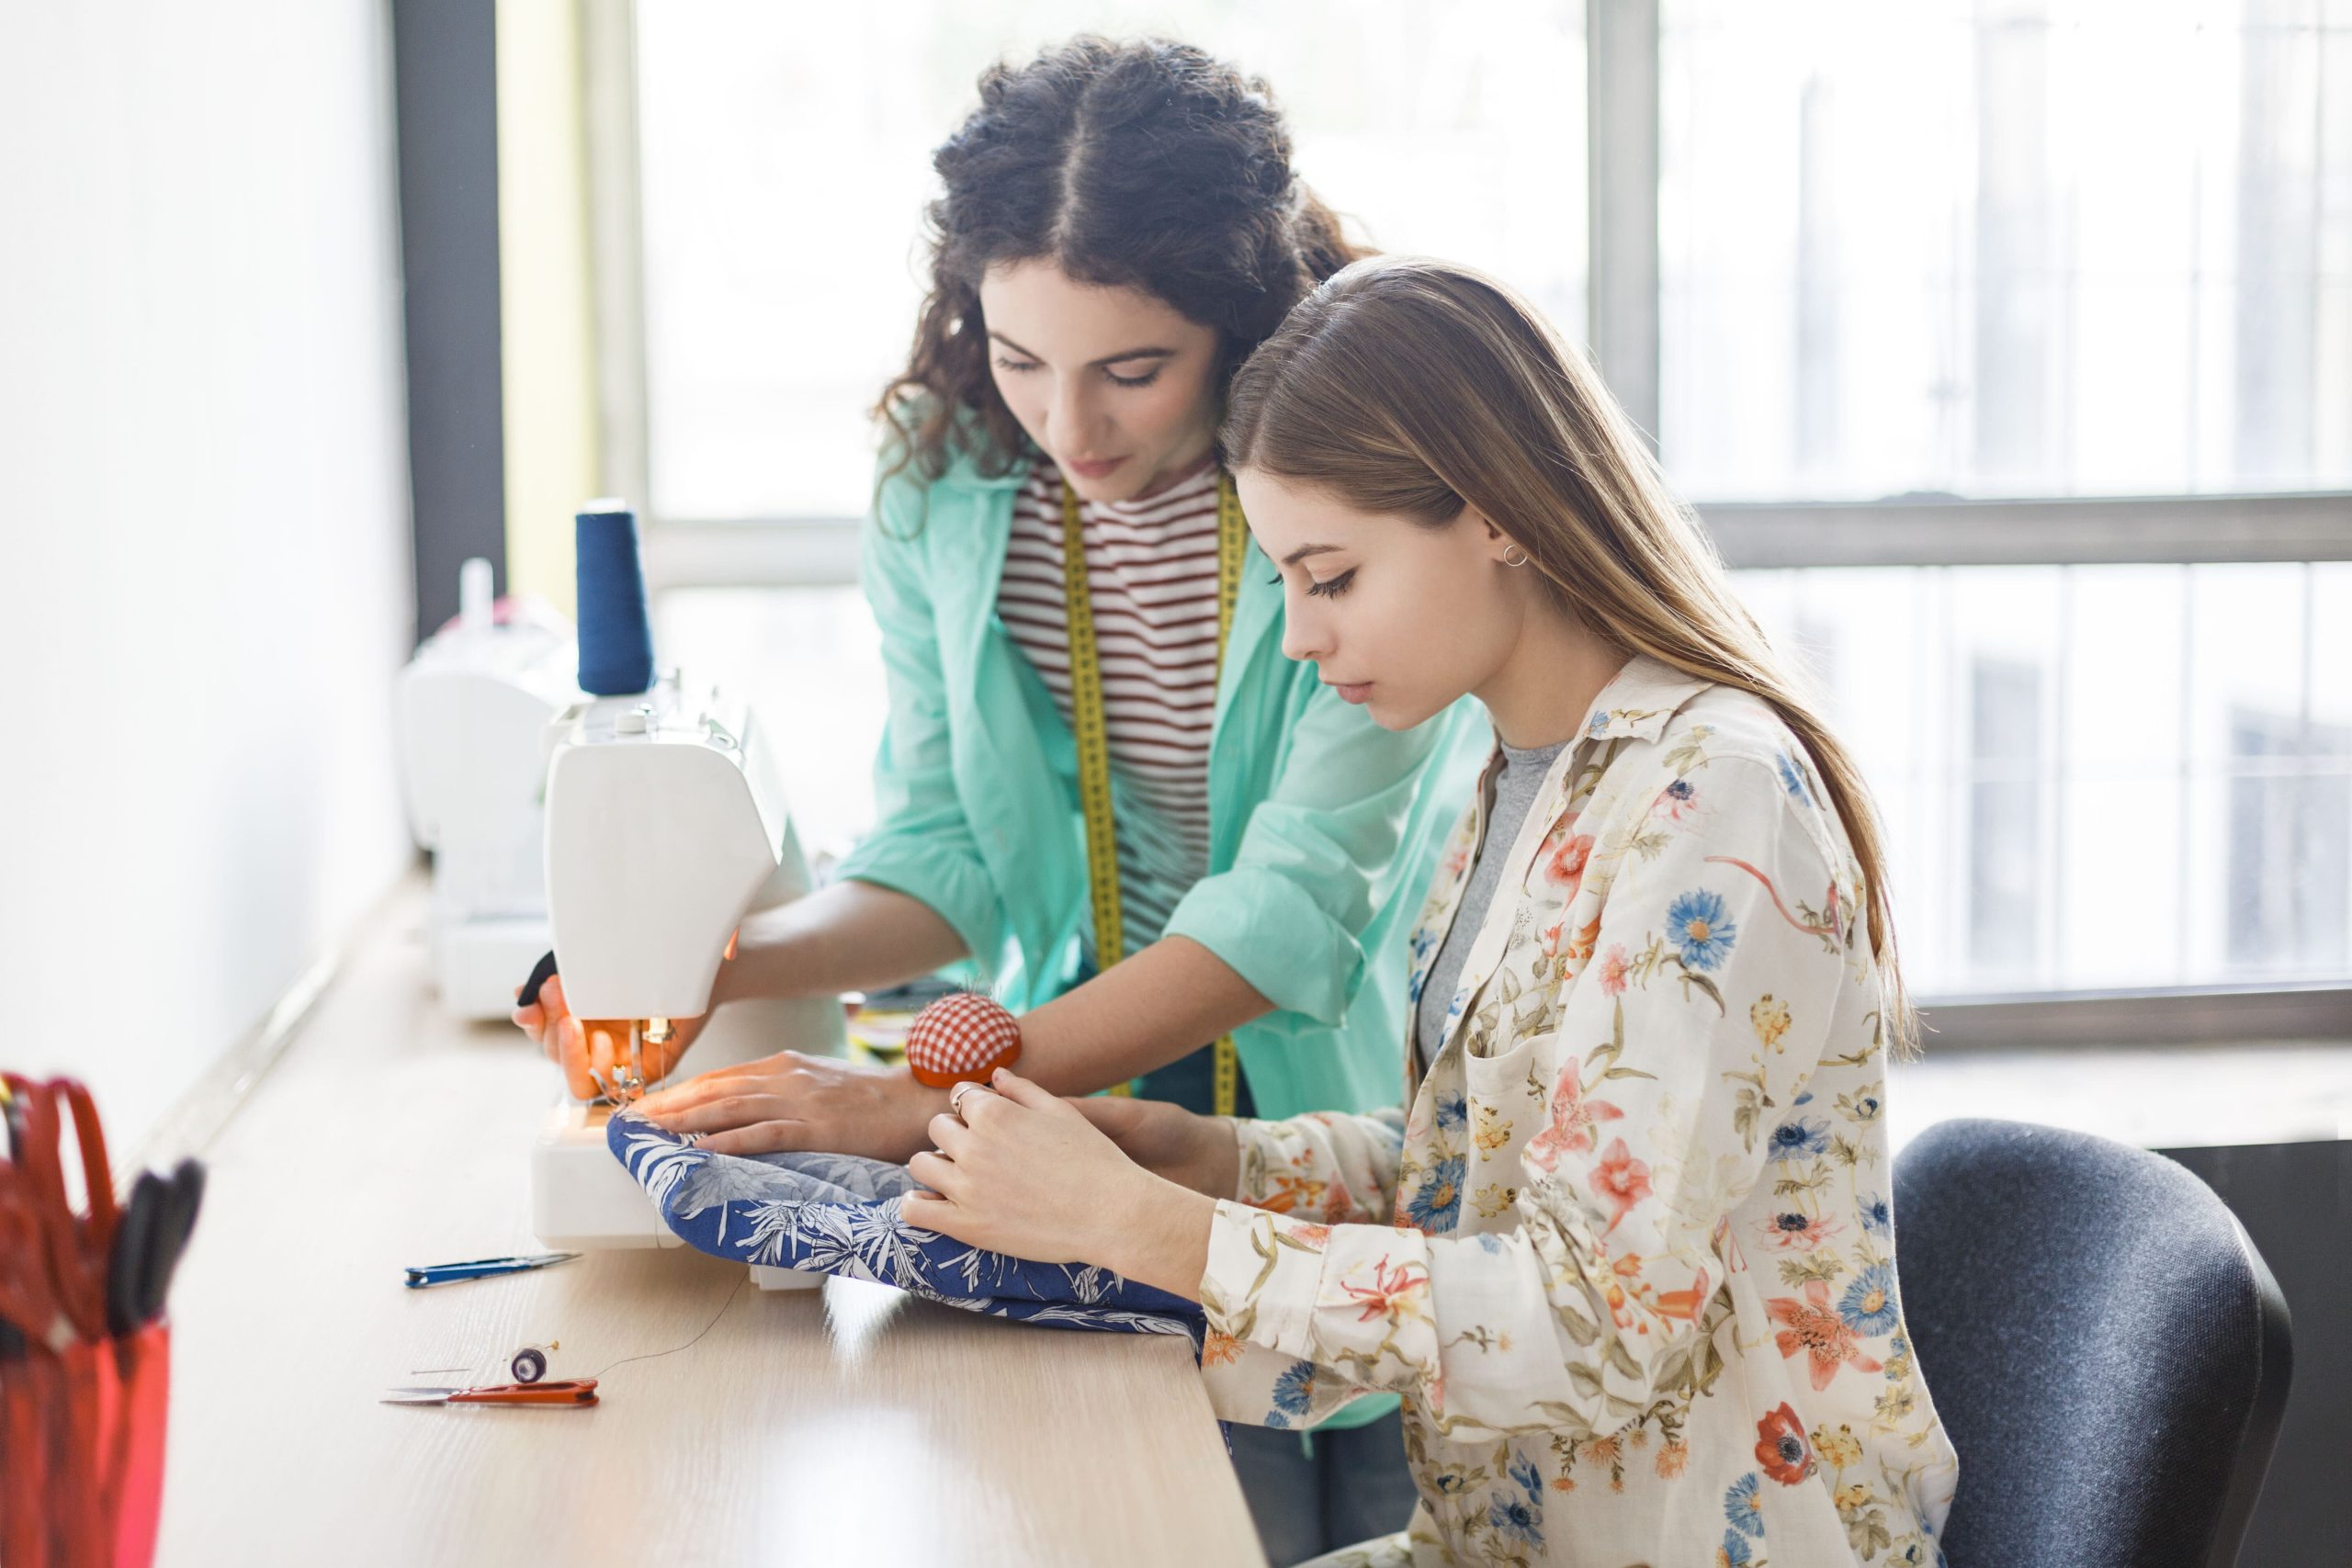 Discover the must-know sewing tips for beginners looking to buy a sewing machine and embark on their creative journey. This easy-to-read article covers essential advice to help you get started and make the most of your sewing projects.